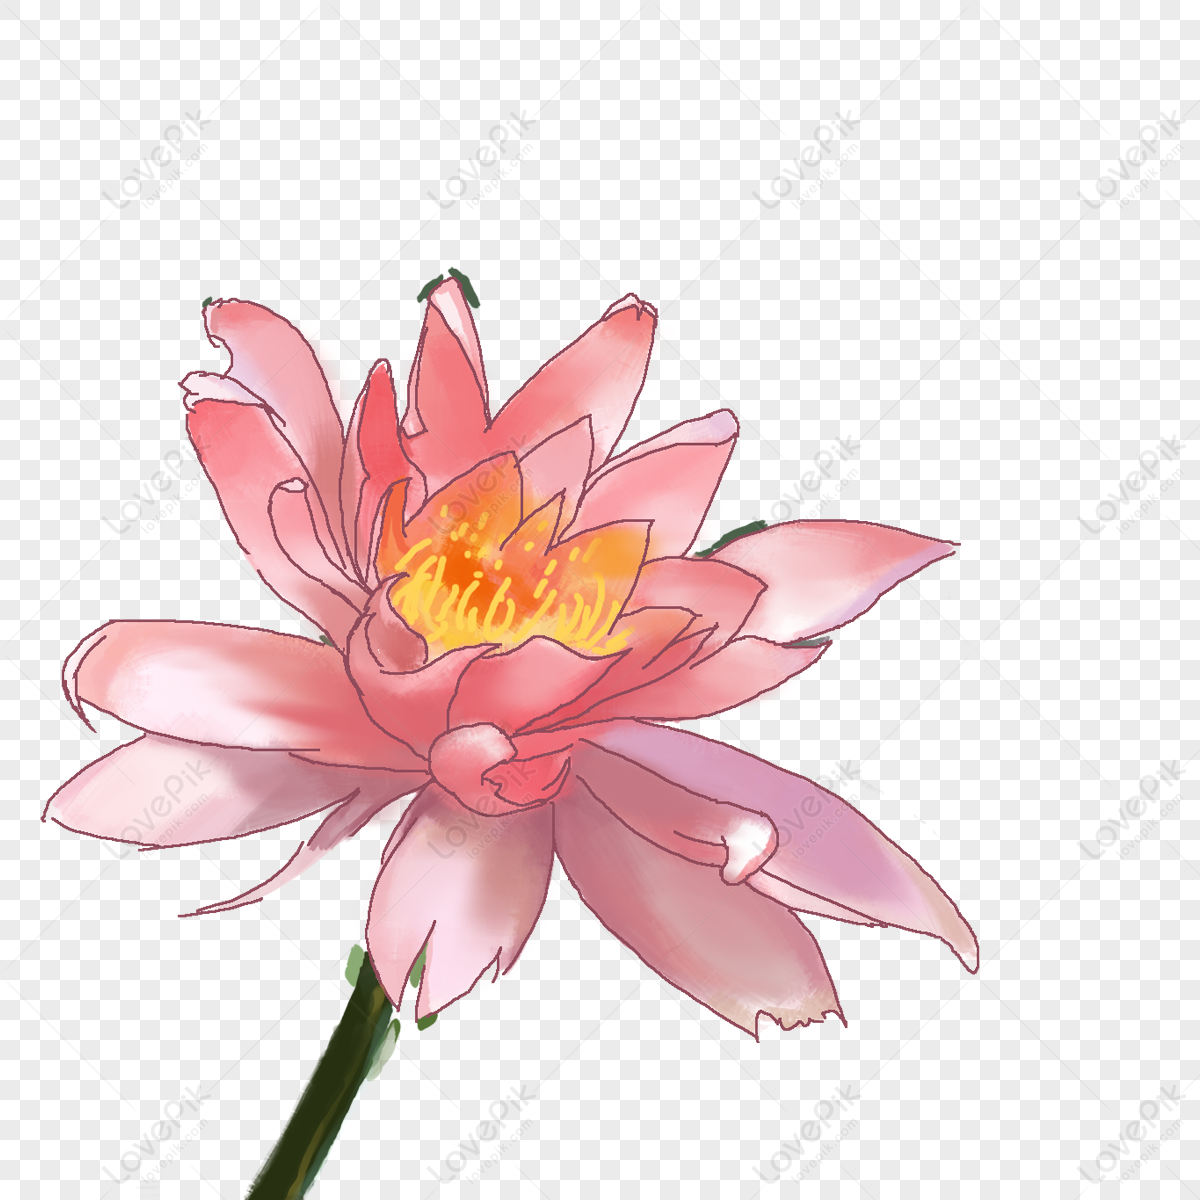 A Lotus Flower PNG Transparent Background And Clipart Image For Free  Download - Lovepik | 400174550